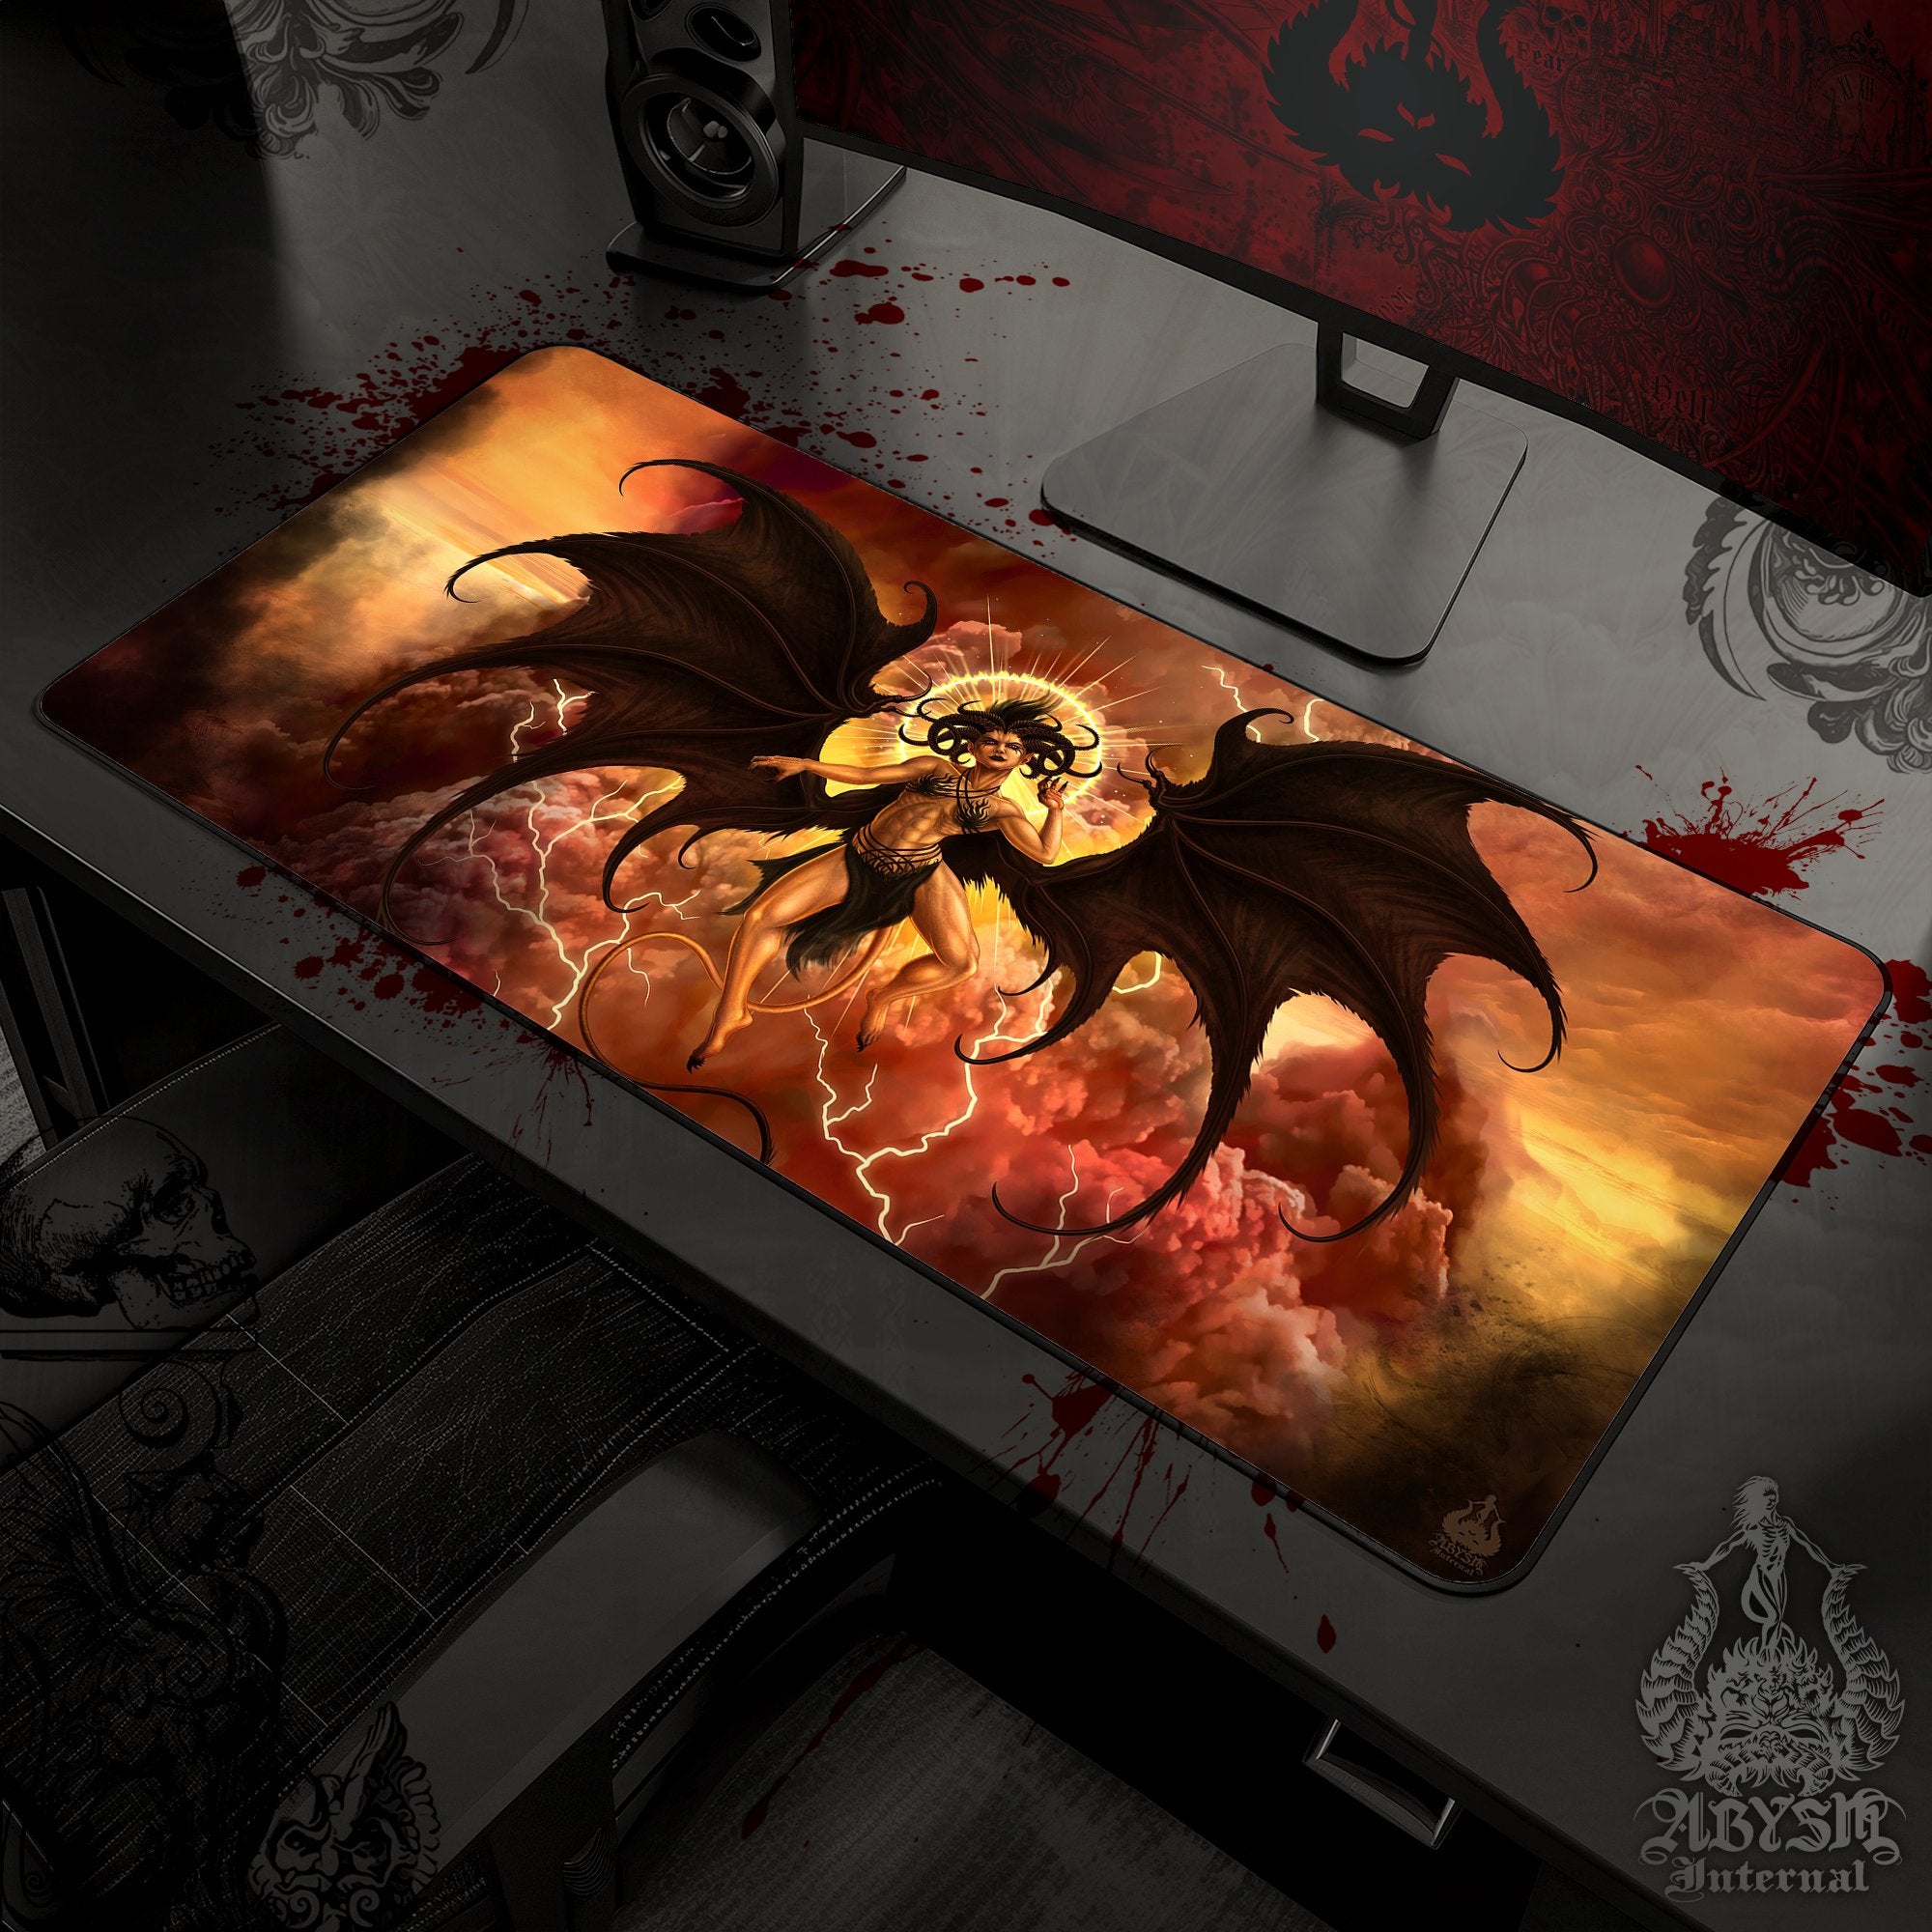 Lilith Gaming Mouse Pad, Demon Desk Mat, Erotic Demoness Table Protector Cover, Satanic Workpad, Dark Fantasy Art Print - Clothed, Nude and Semi, 3 Options - Abysm Internal